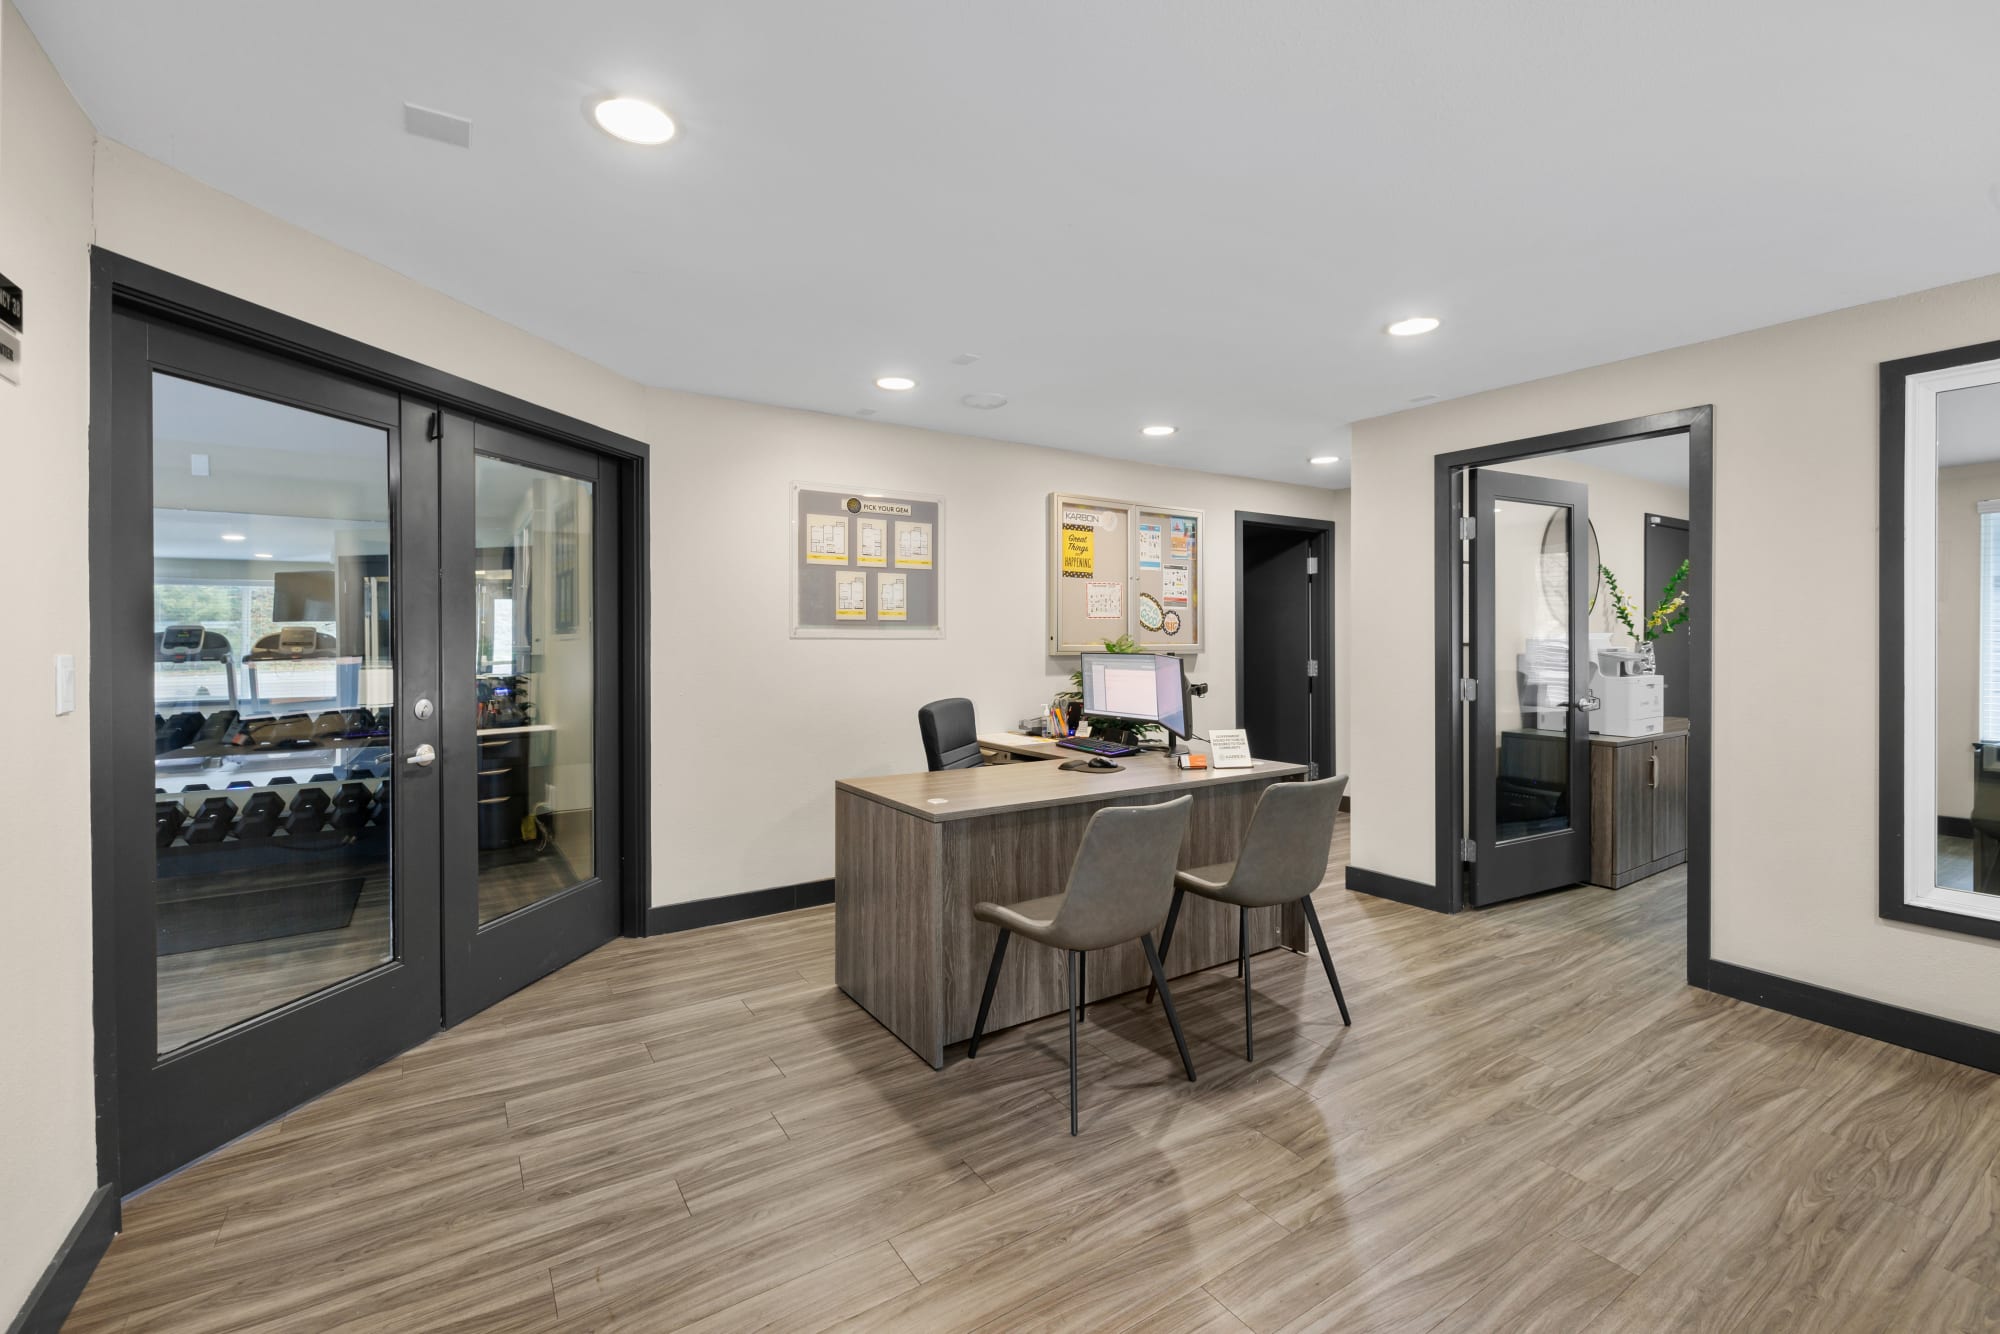 The newly renovated leasing office at Karbon Apartments in Newcastle, Washington